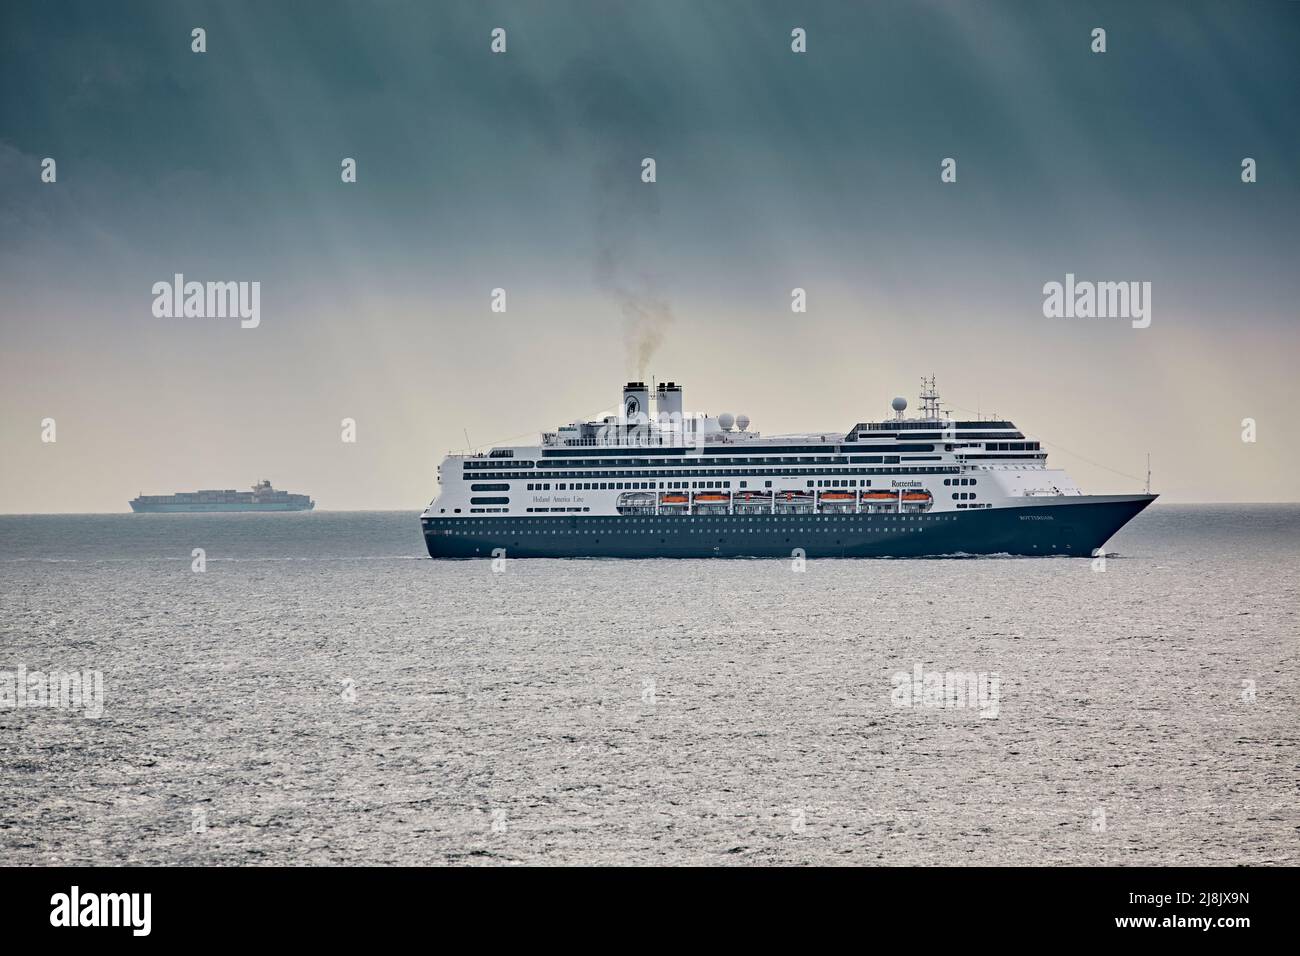 Holland,America,Line,Cruise,ship,Rotterdam,travel,Channel,North Sea,boat,liner,drama,dramatic,light,sun,clouds,luxery,luxury,navigation,seascape,ship, Stock Photo